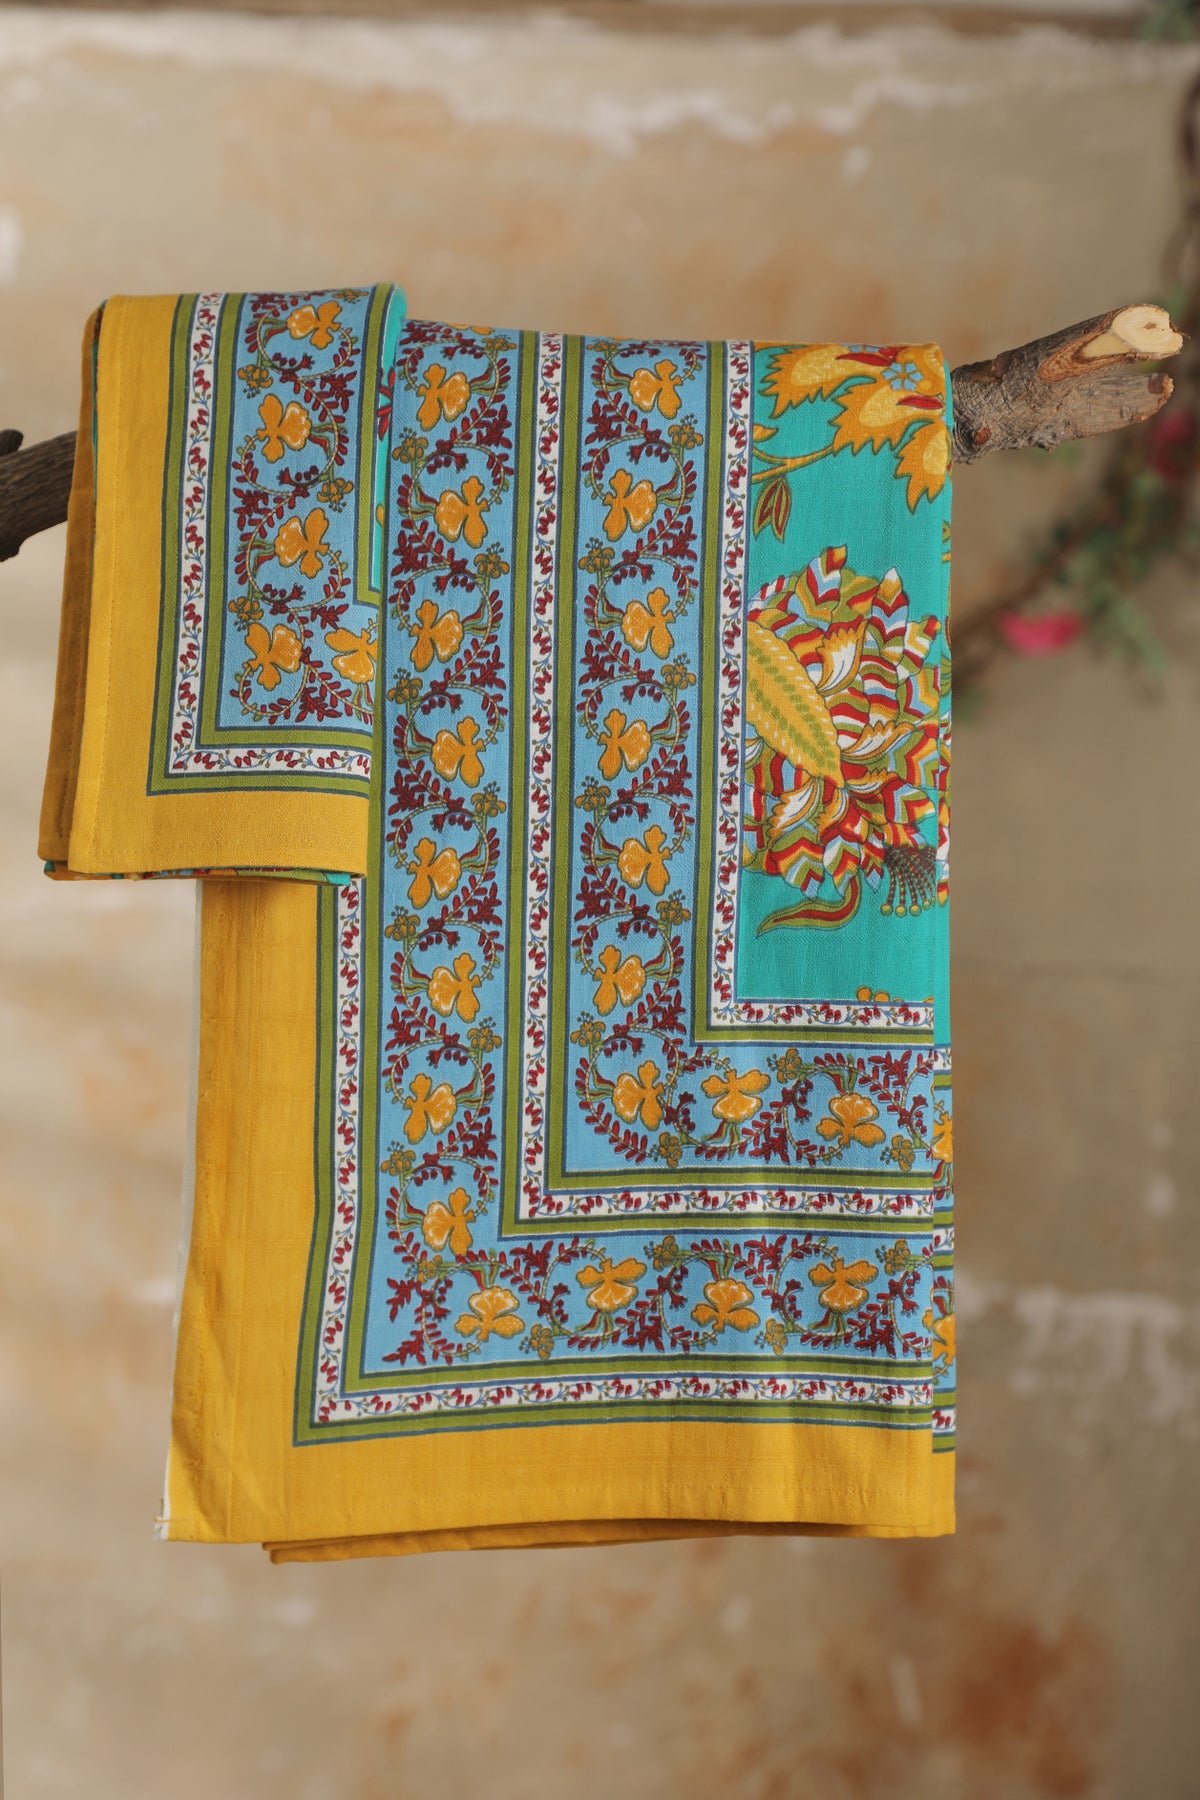 Floral Design Jaipur Print Turquoise Blue And Yellow Cotton Single Bedspread And Pillow Cover Set